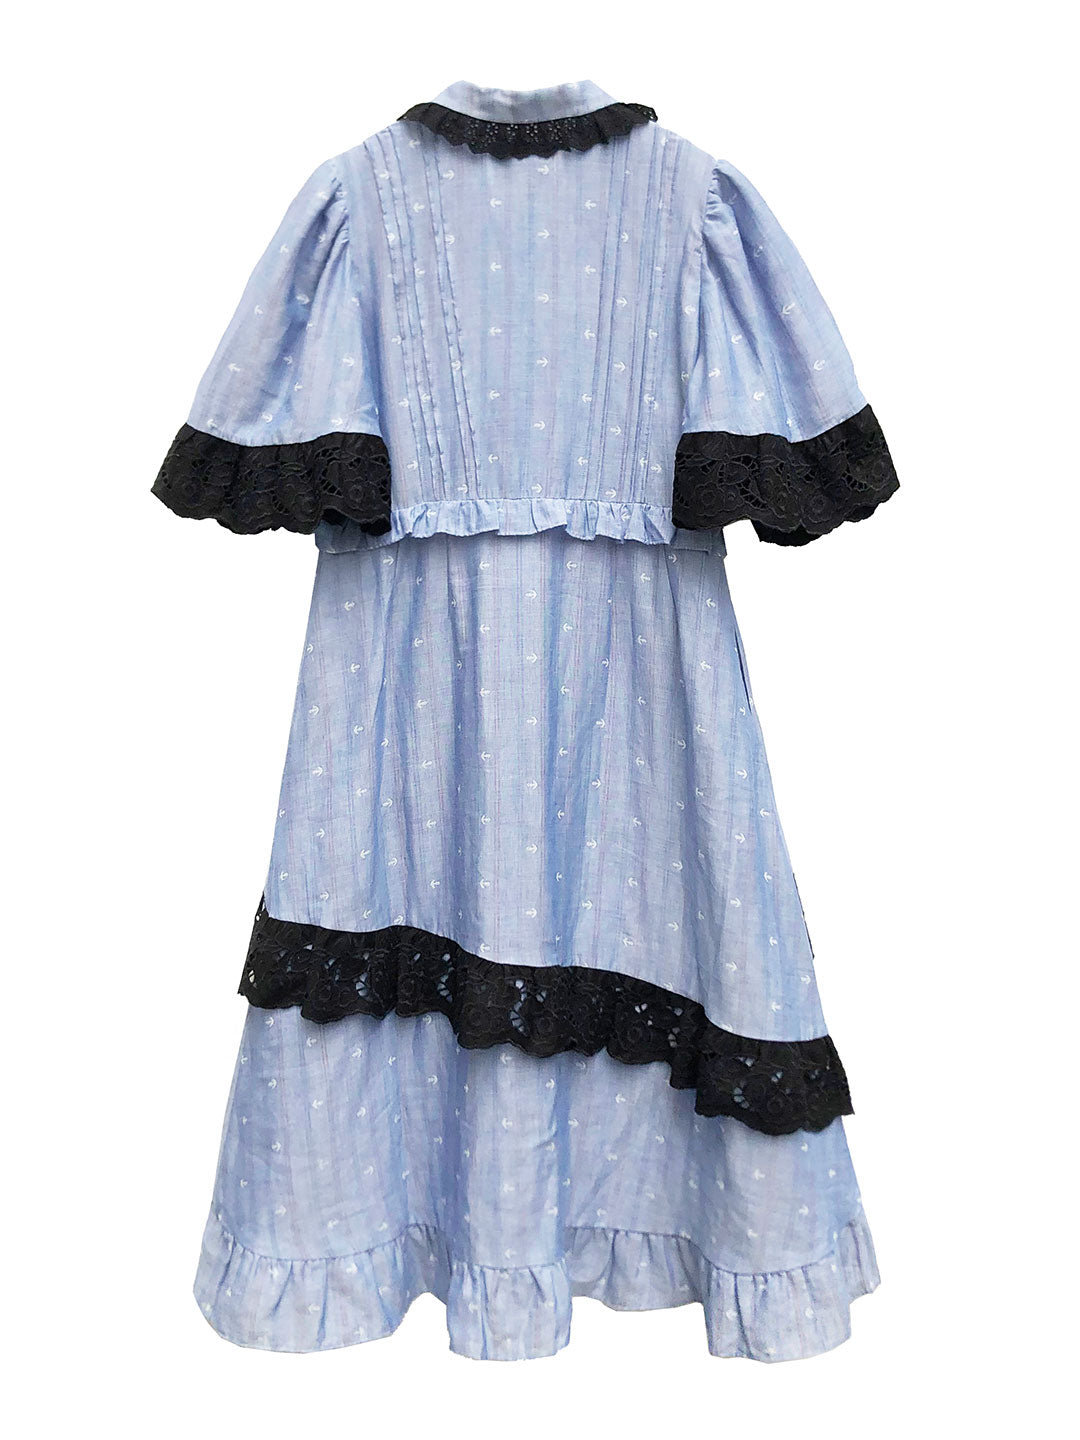 Unlogical Poem Anchor Embroidered Lace Cotton Dress-Light Blue